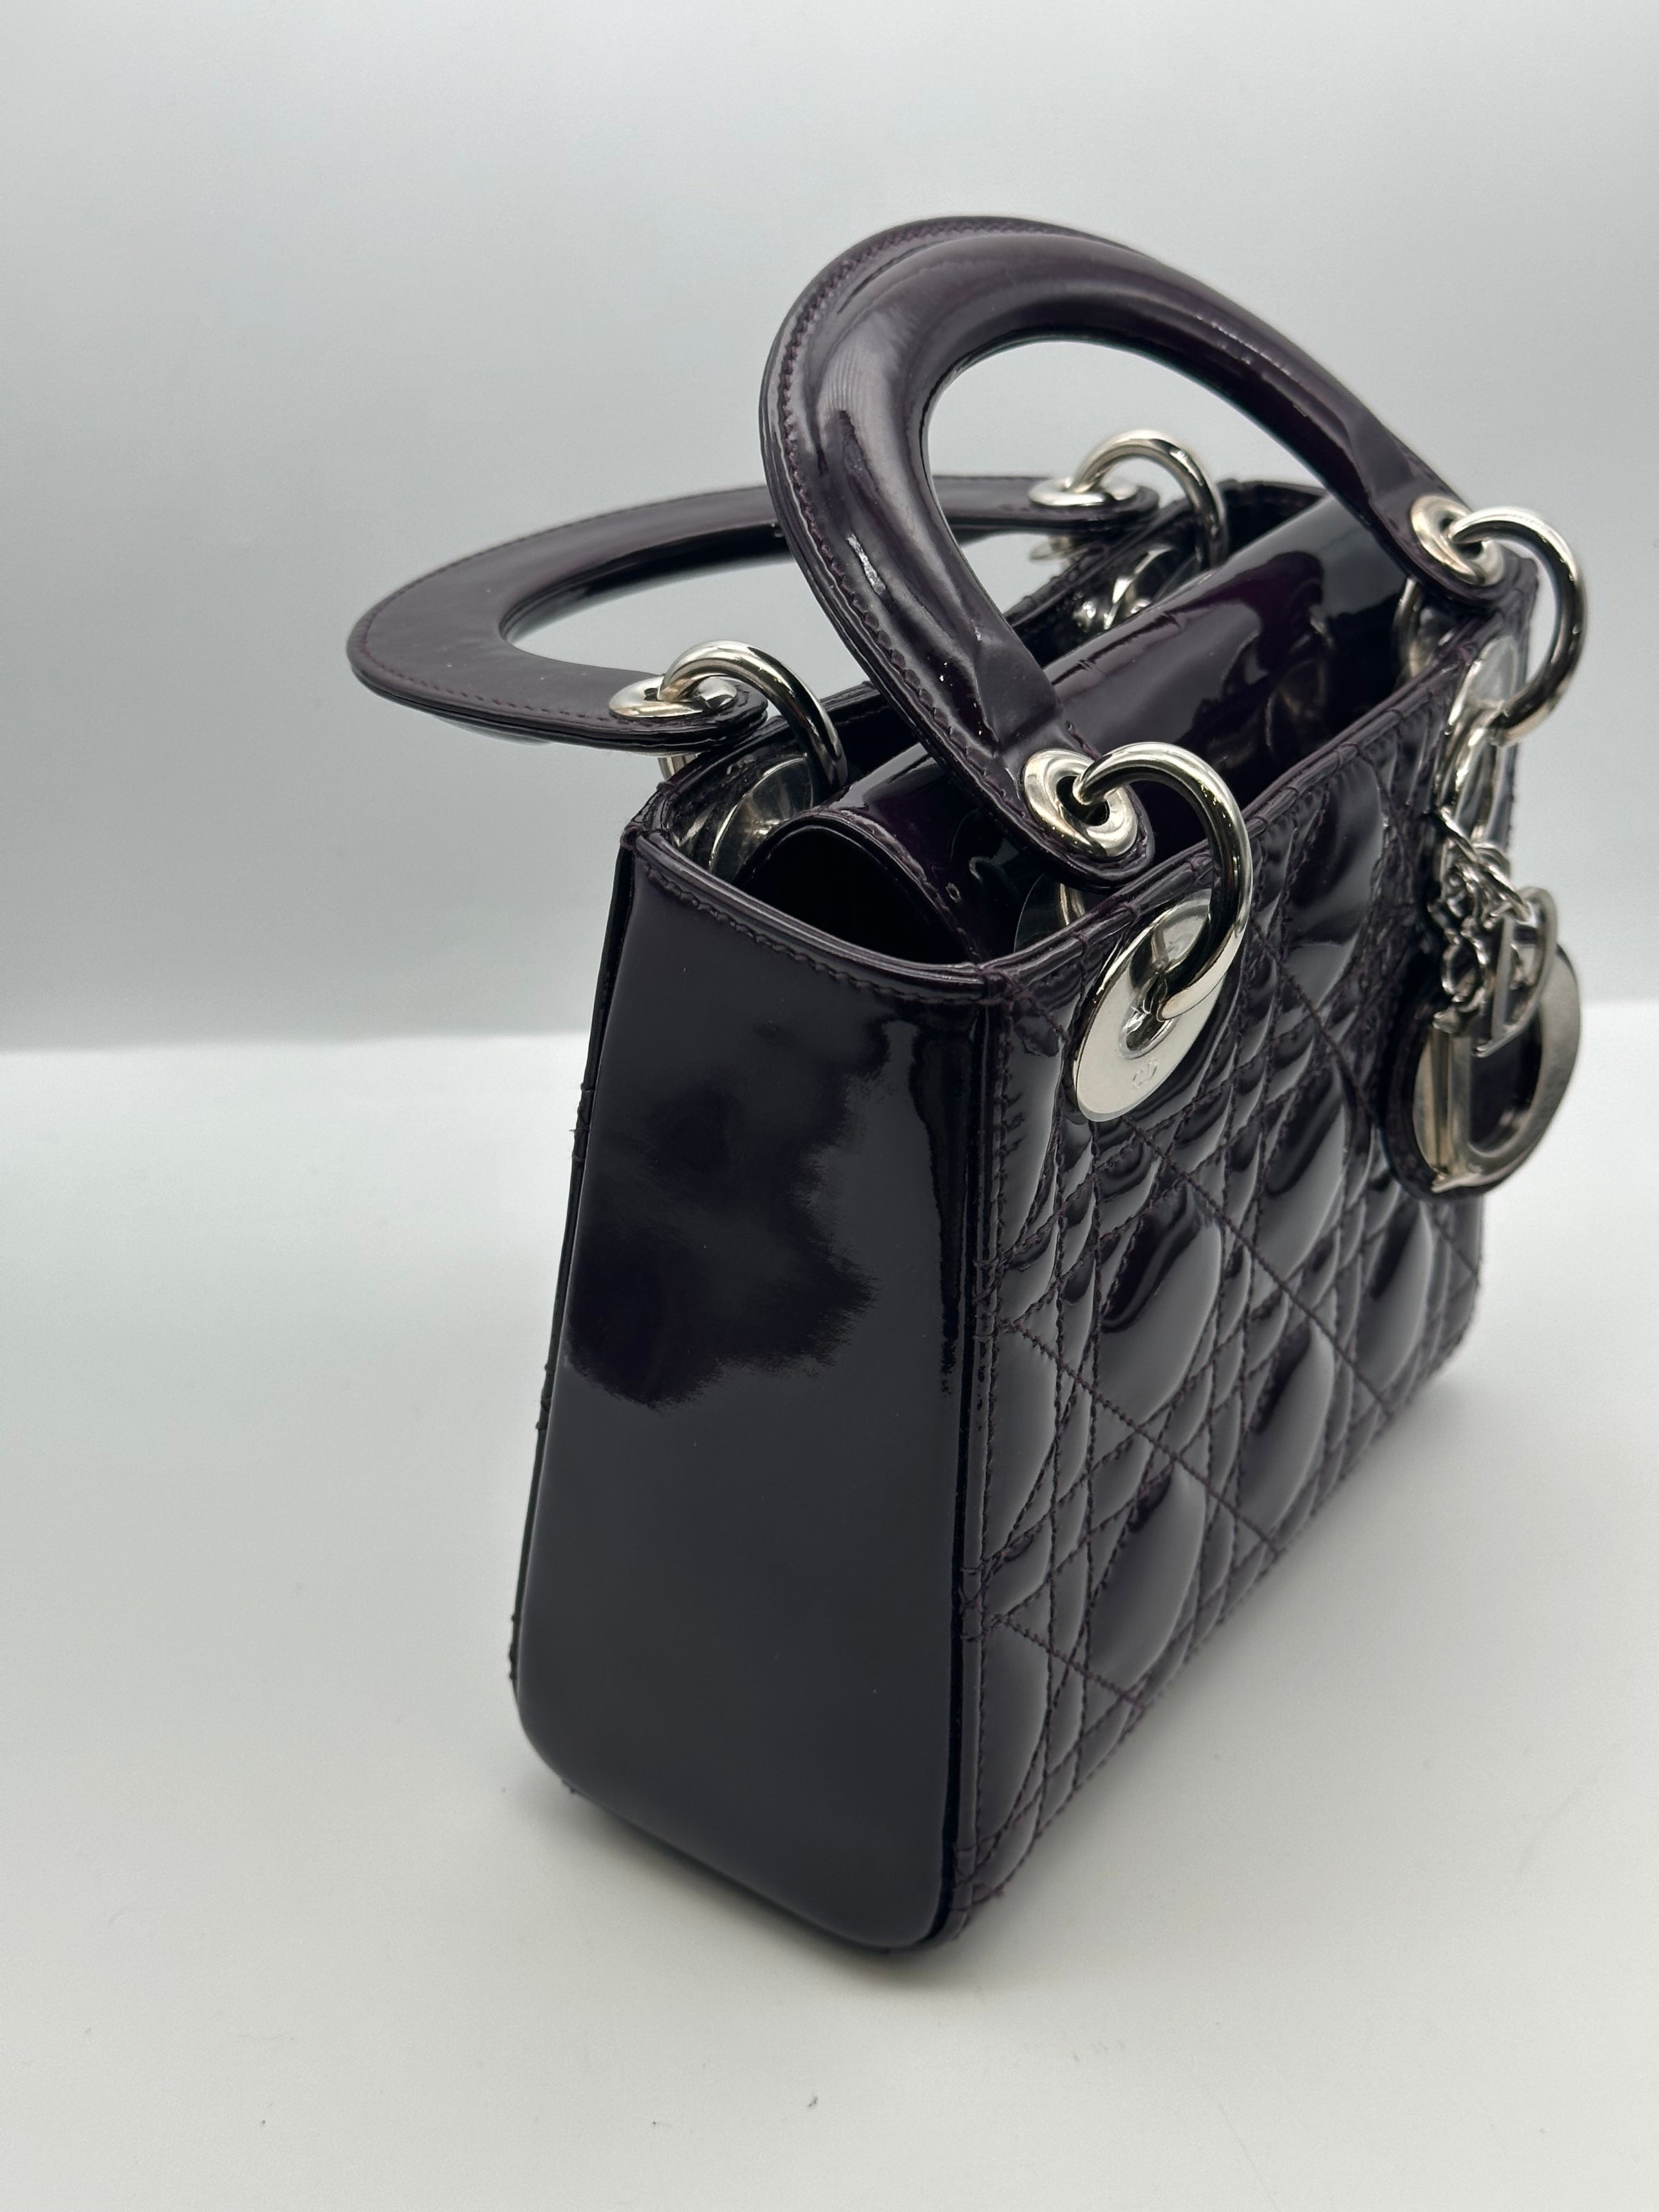 Shop Exclusive Dior Bags For Women